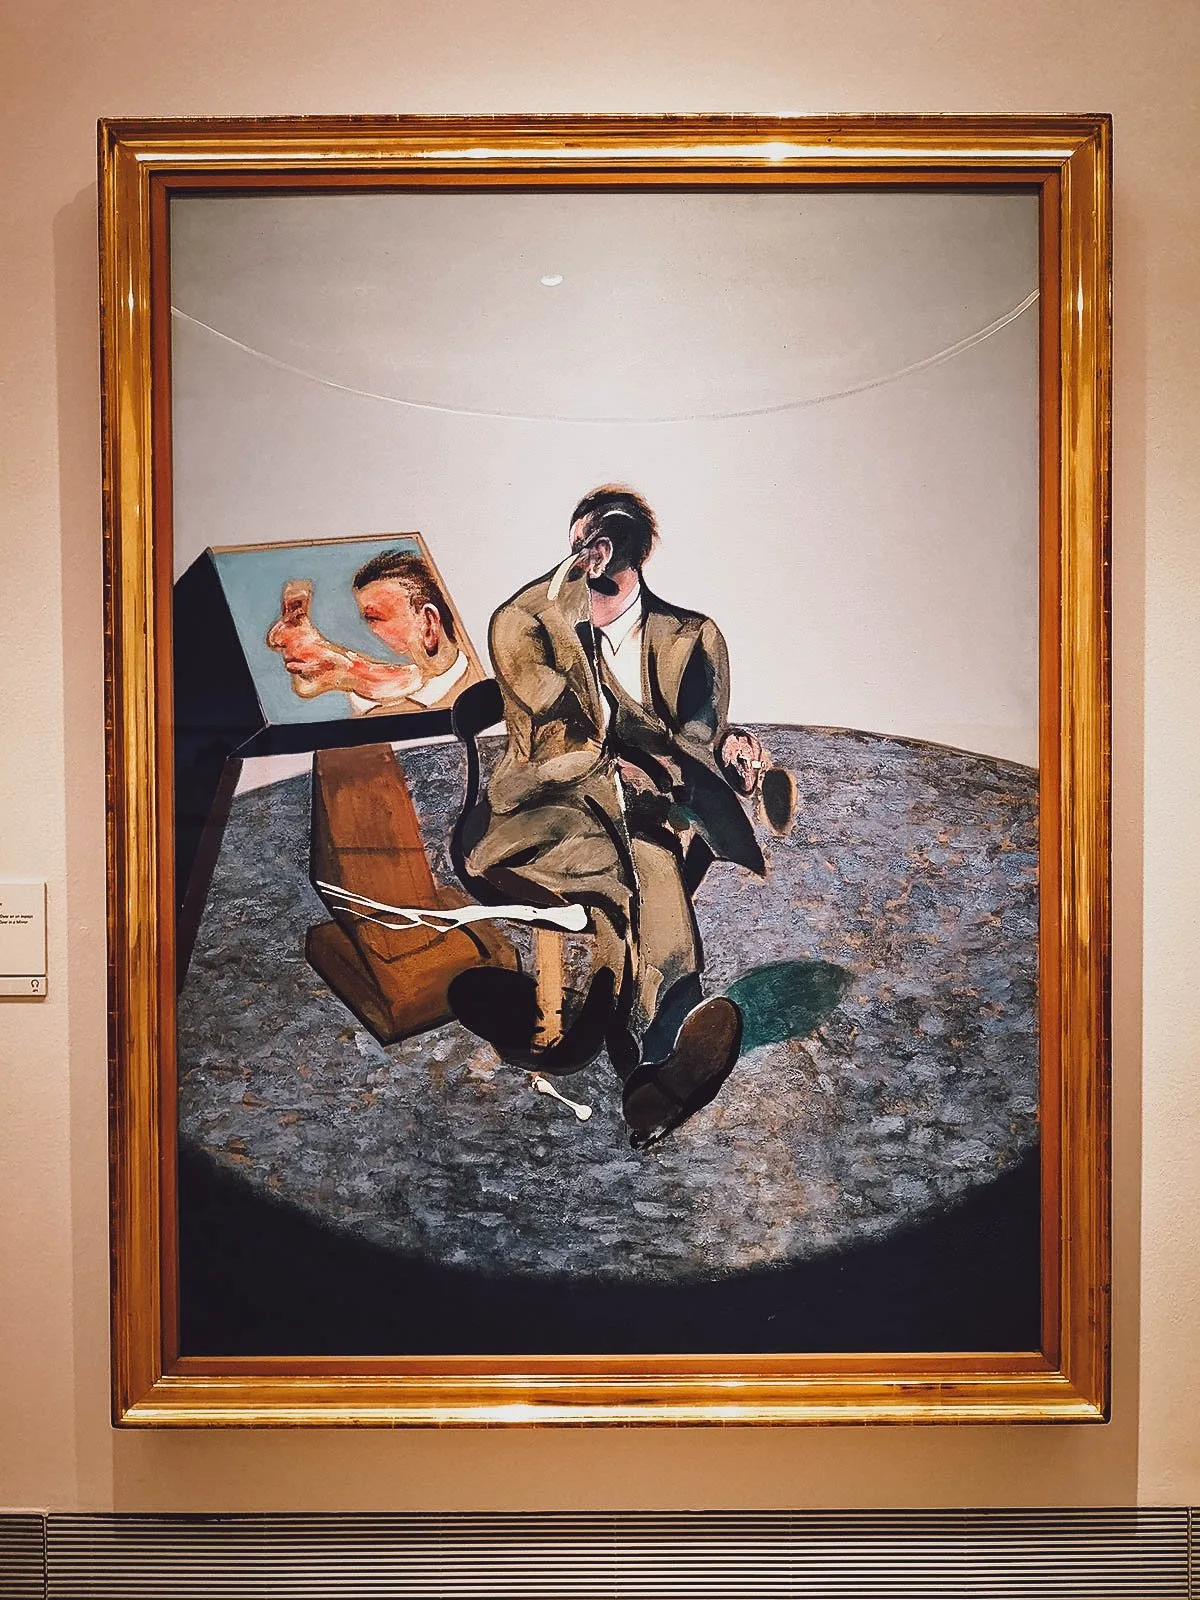 Madrid Travel Guide in Photos: Painting by Francis Bacon at the Thyssen-Bornemisza Museum